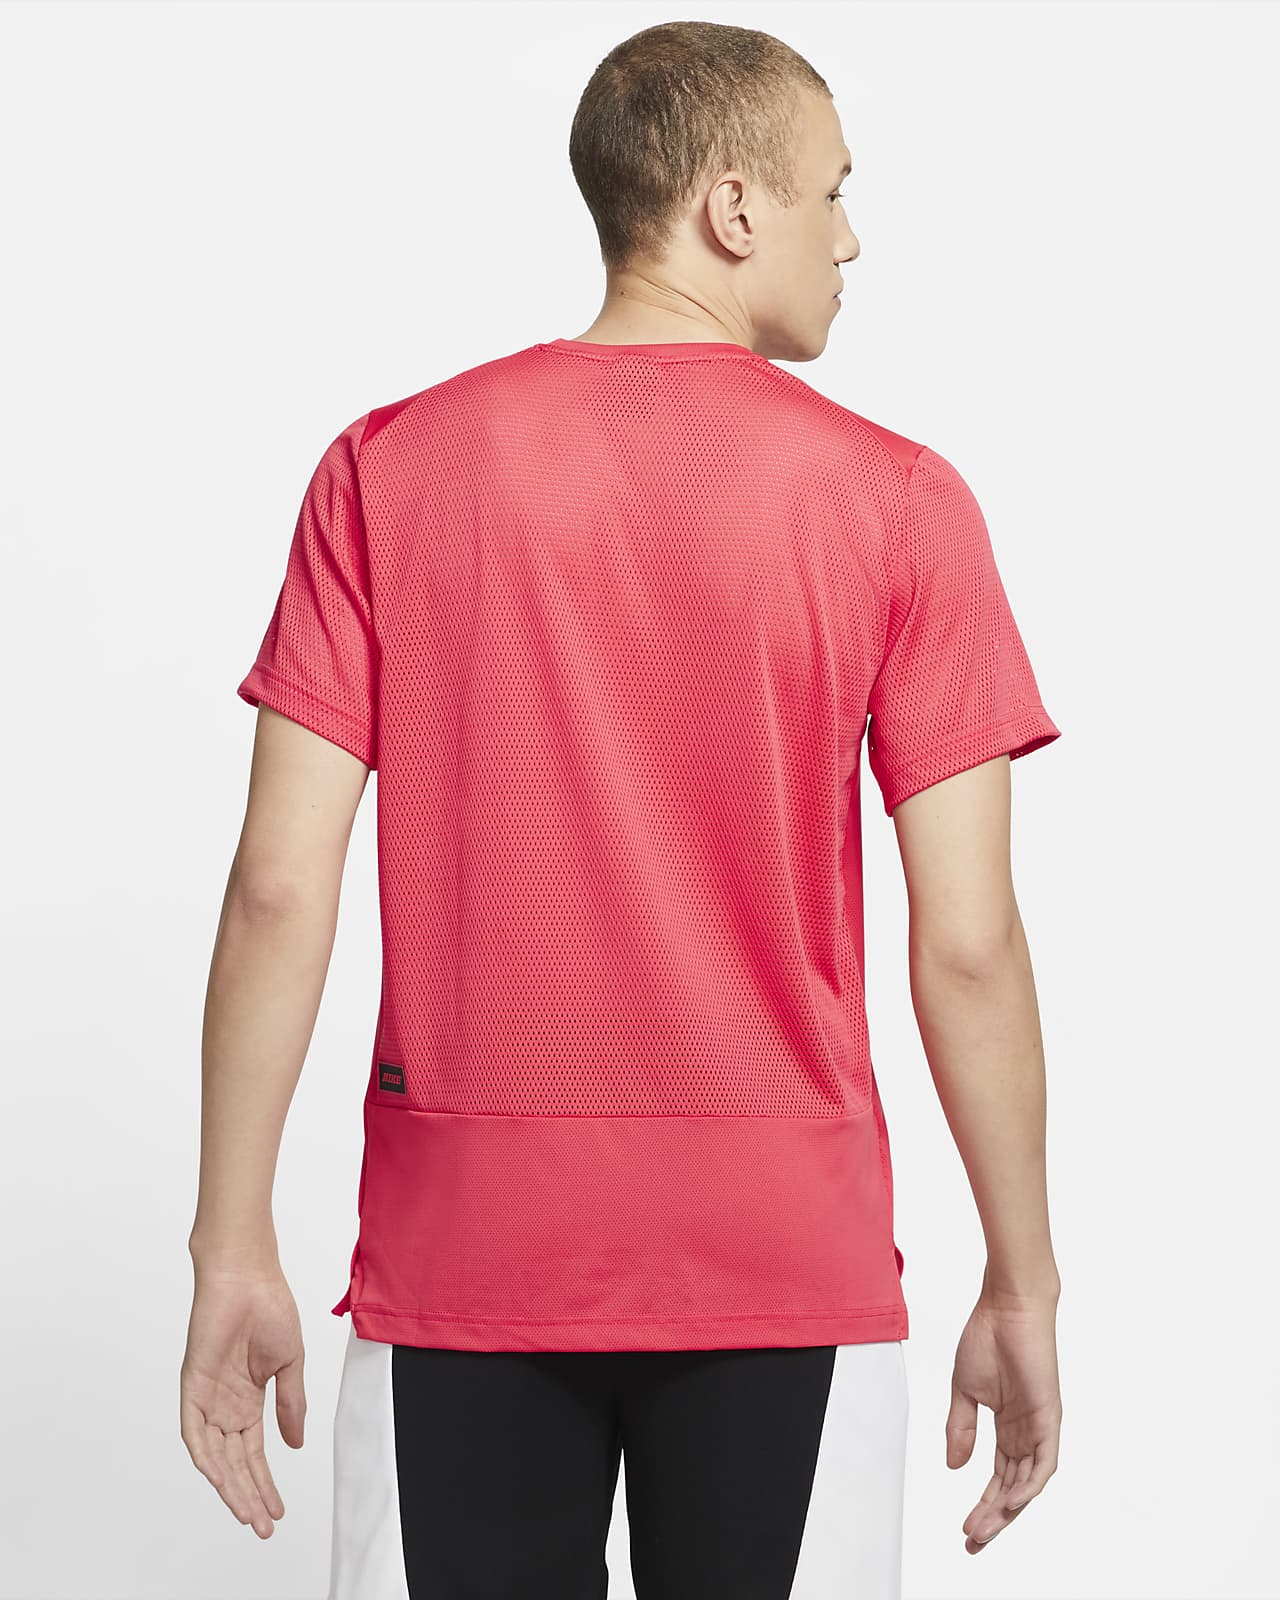 red nike training top